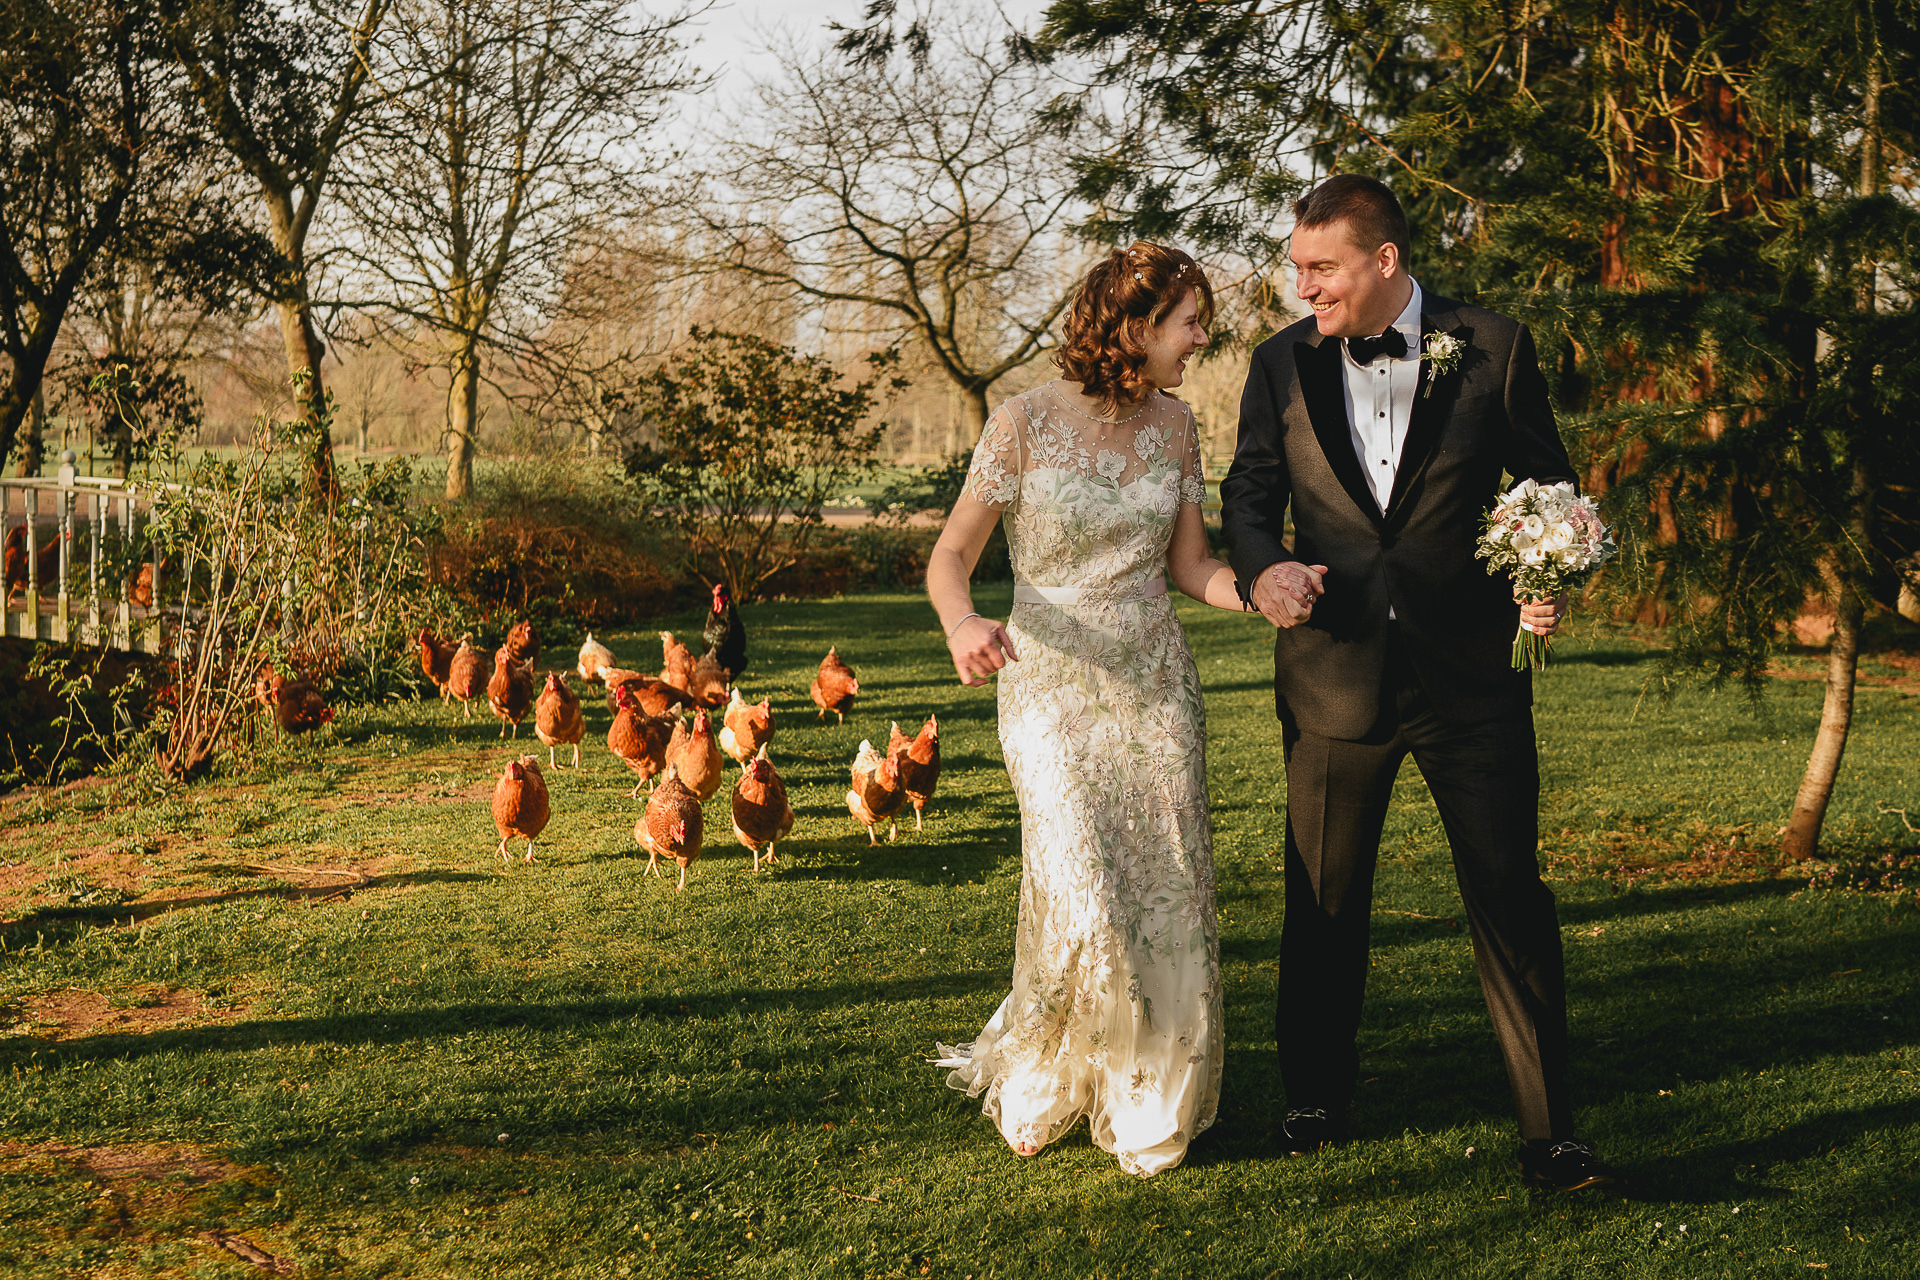 A bride and groom laughing with a group of chickens chasing them